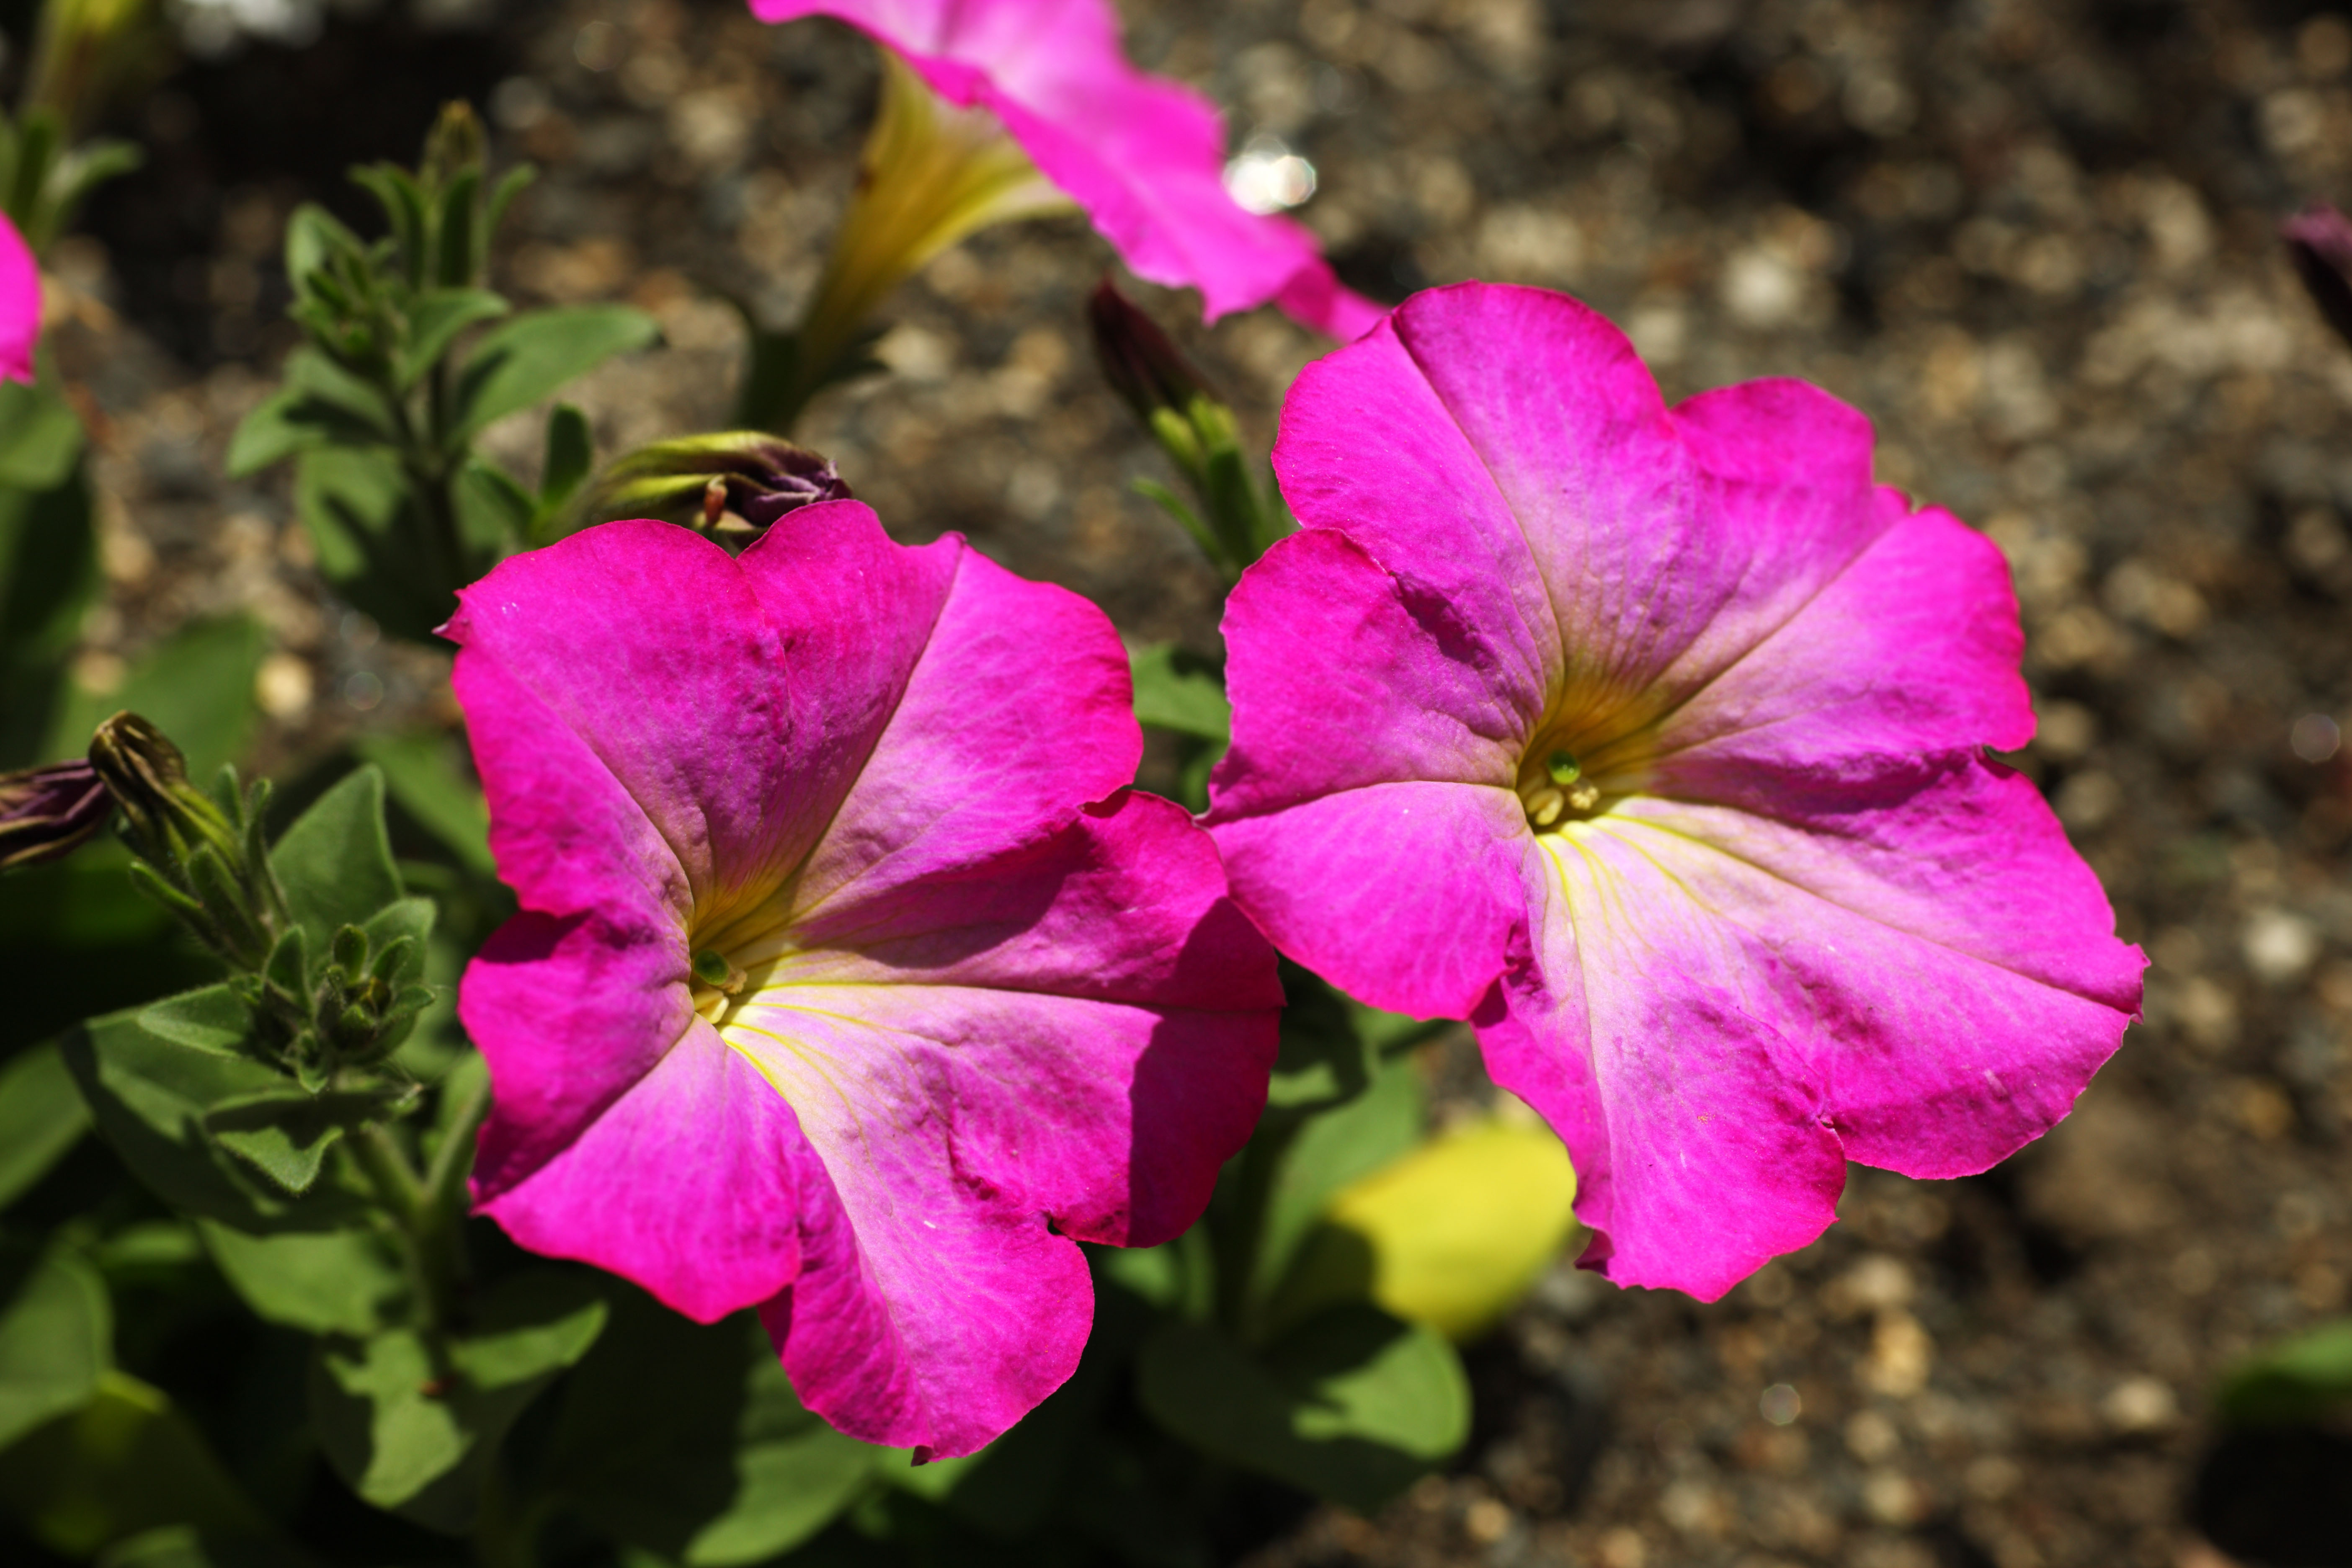 photo,material,free,landscape,picture,stock photo,Creative Commons,A petunia, Gardening, petunia, Pink, 